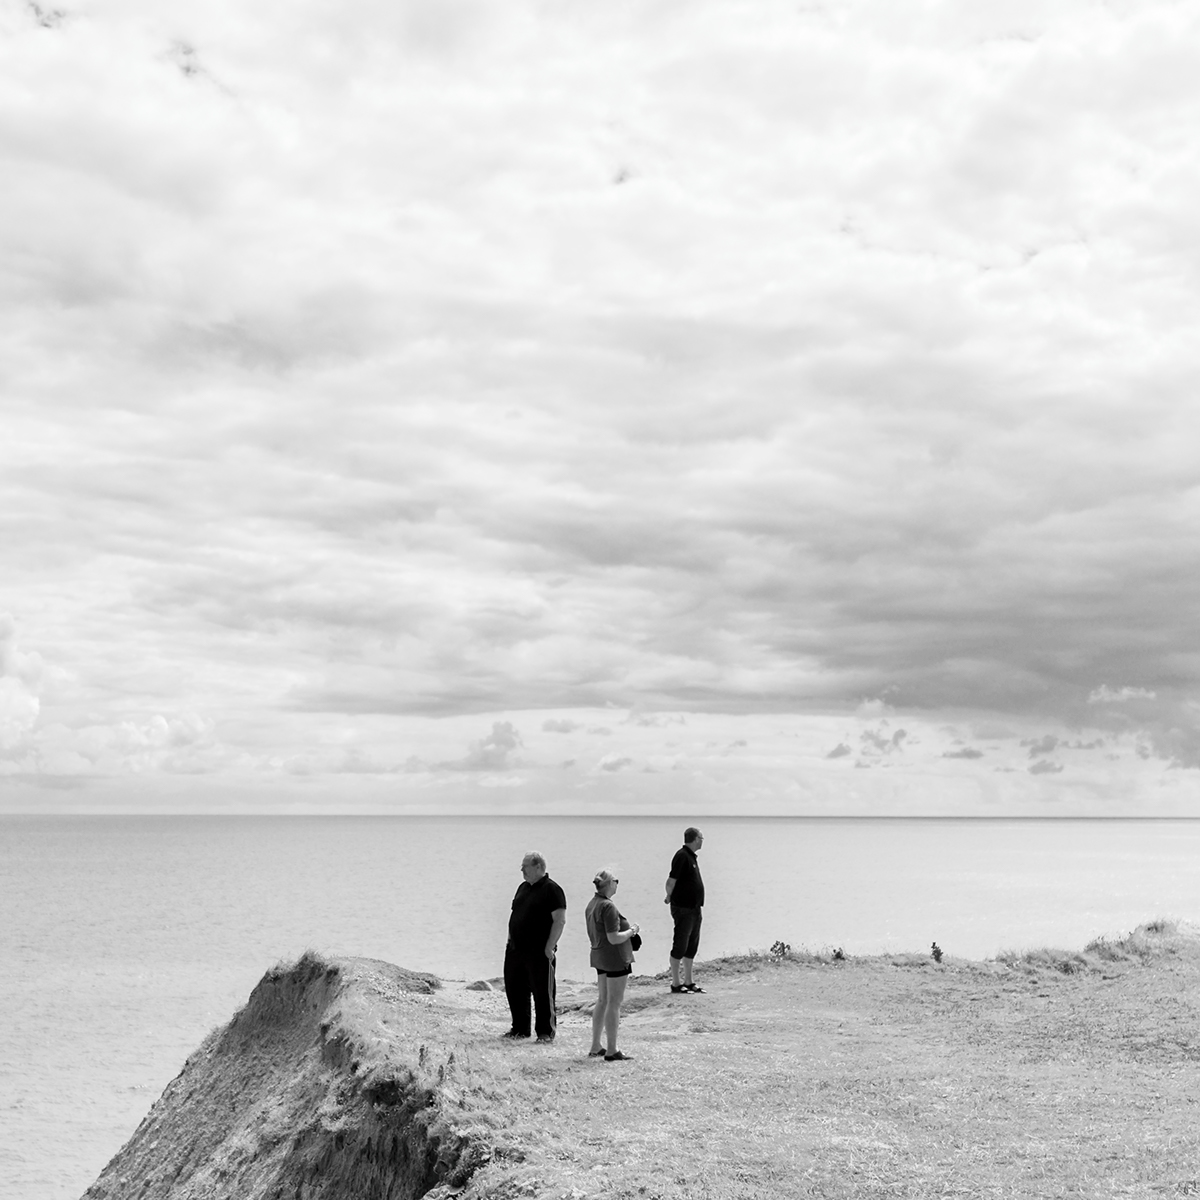 landscapes people interaction black and white sand beach Ocean denmark Europe emotion look view summer solitude remote